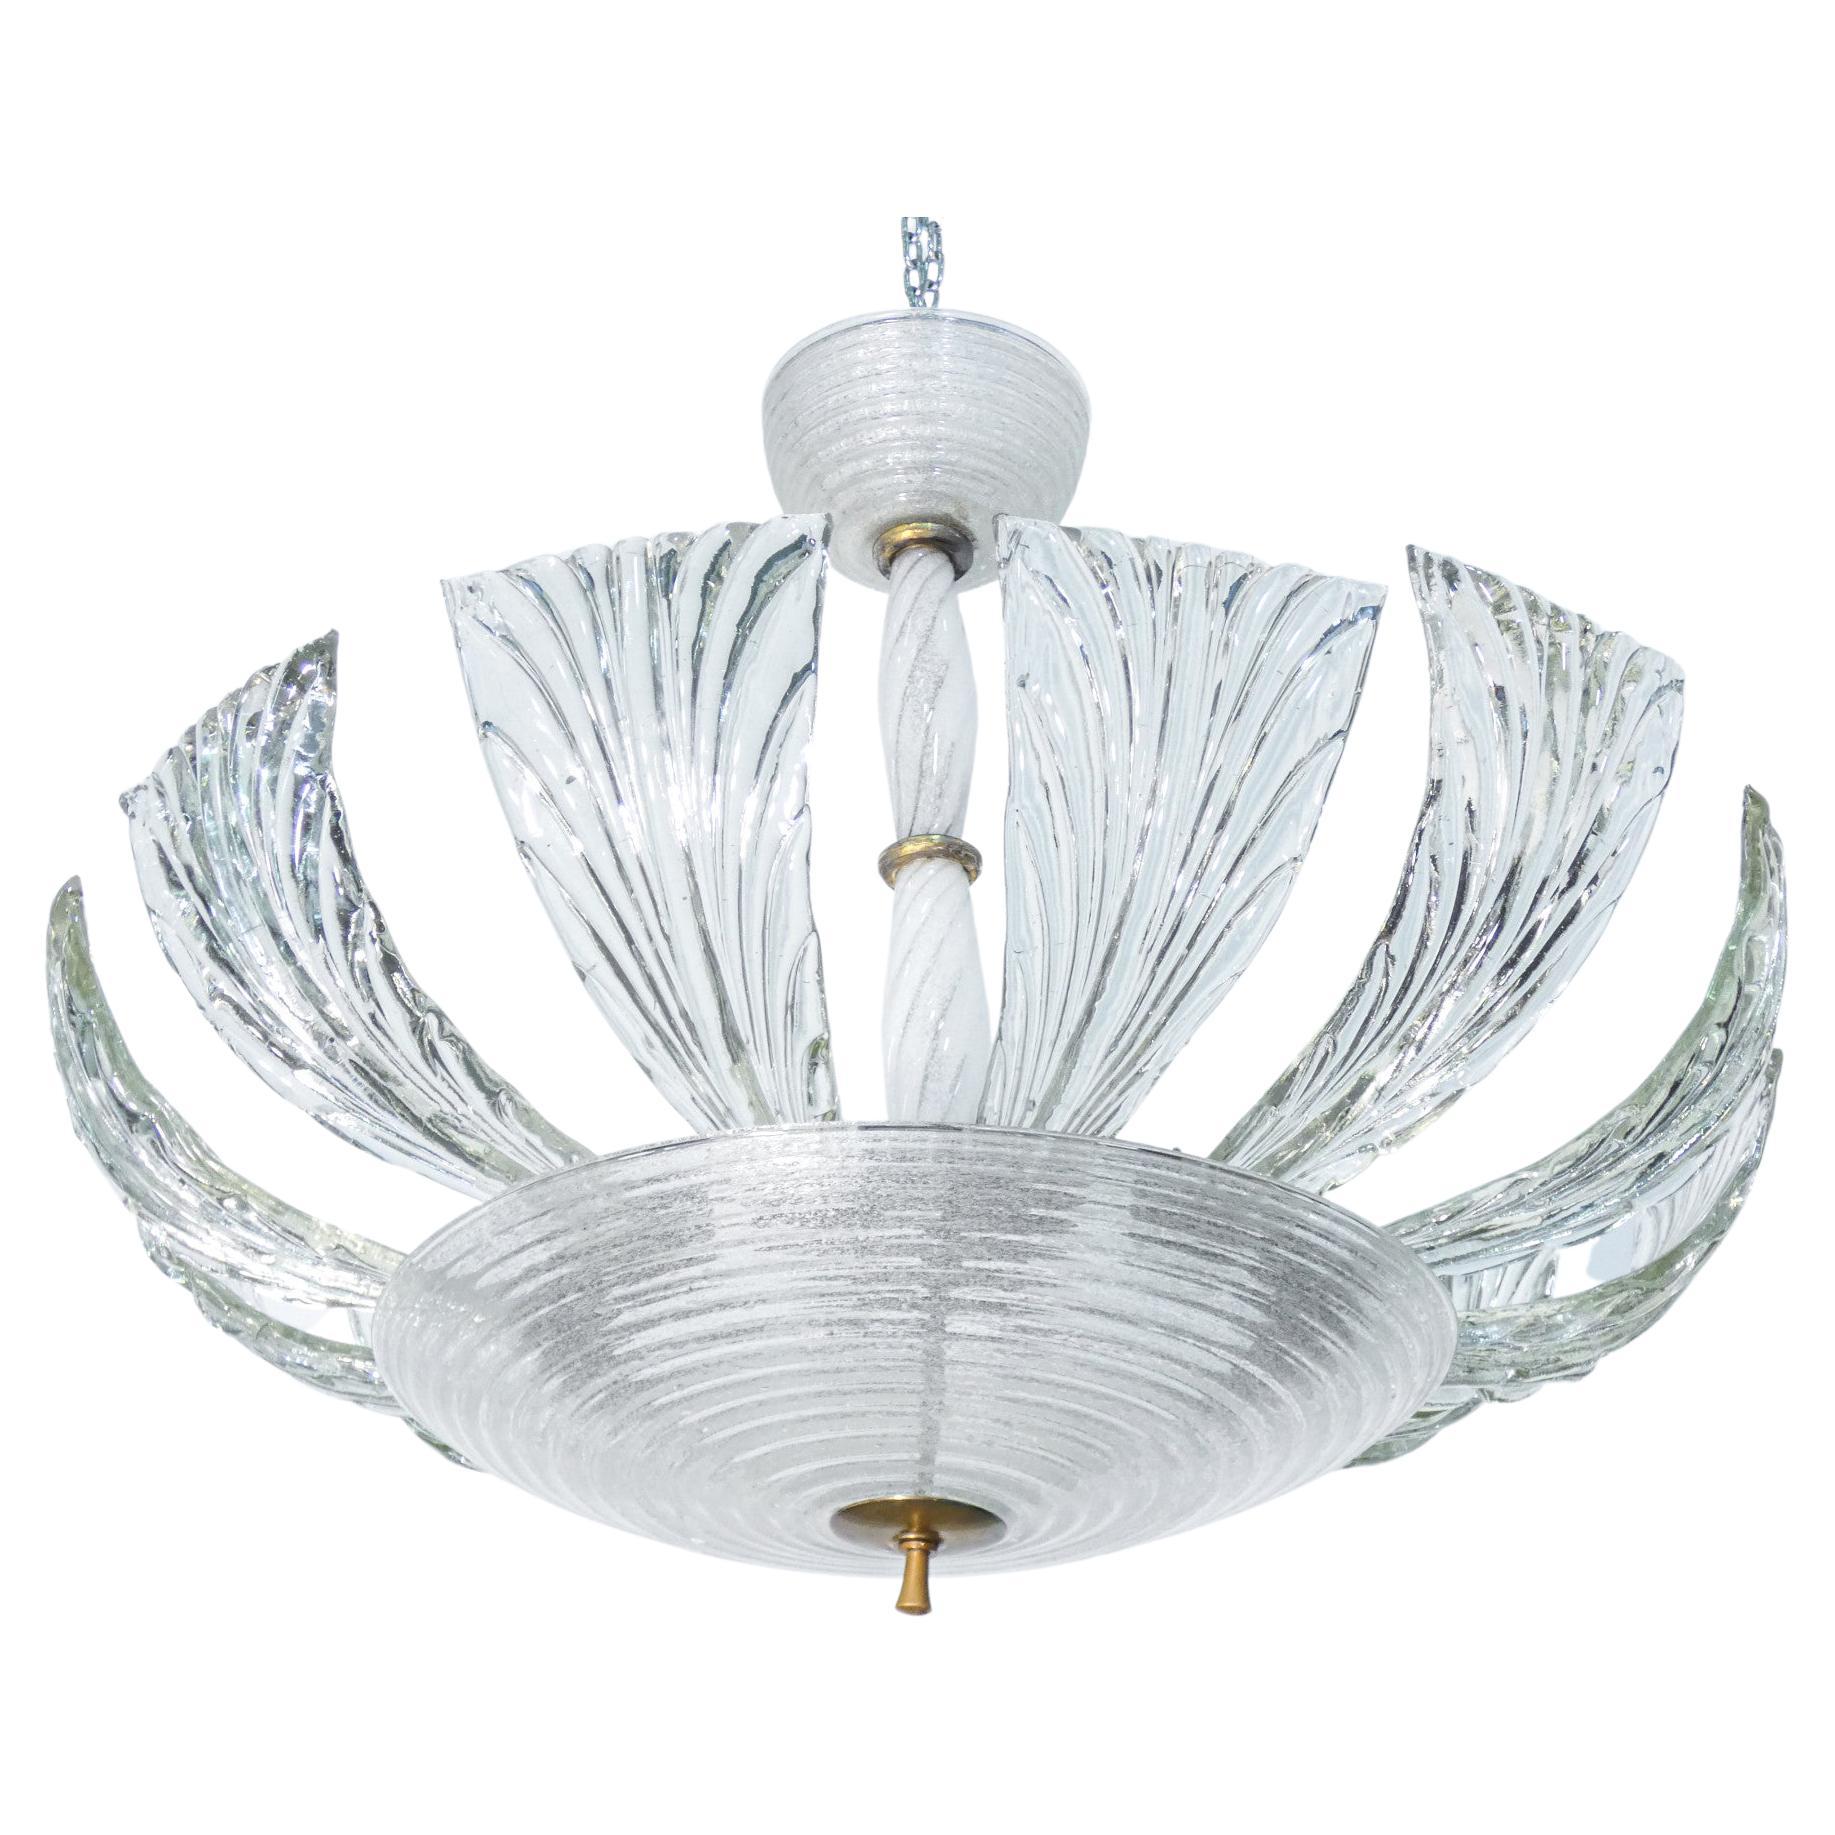 Chandelier in Blown Glass, Design by Barovier & Toso, Murano, 1940s